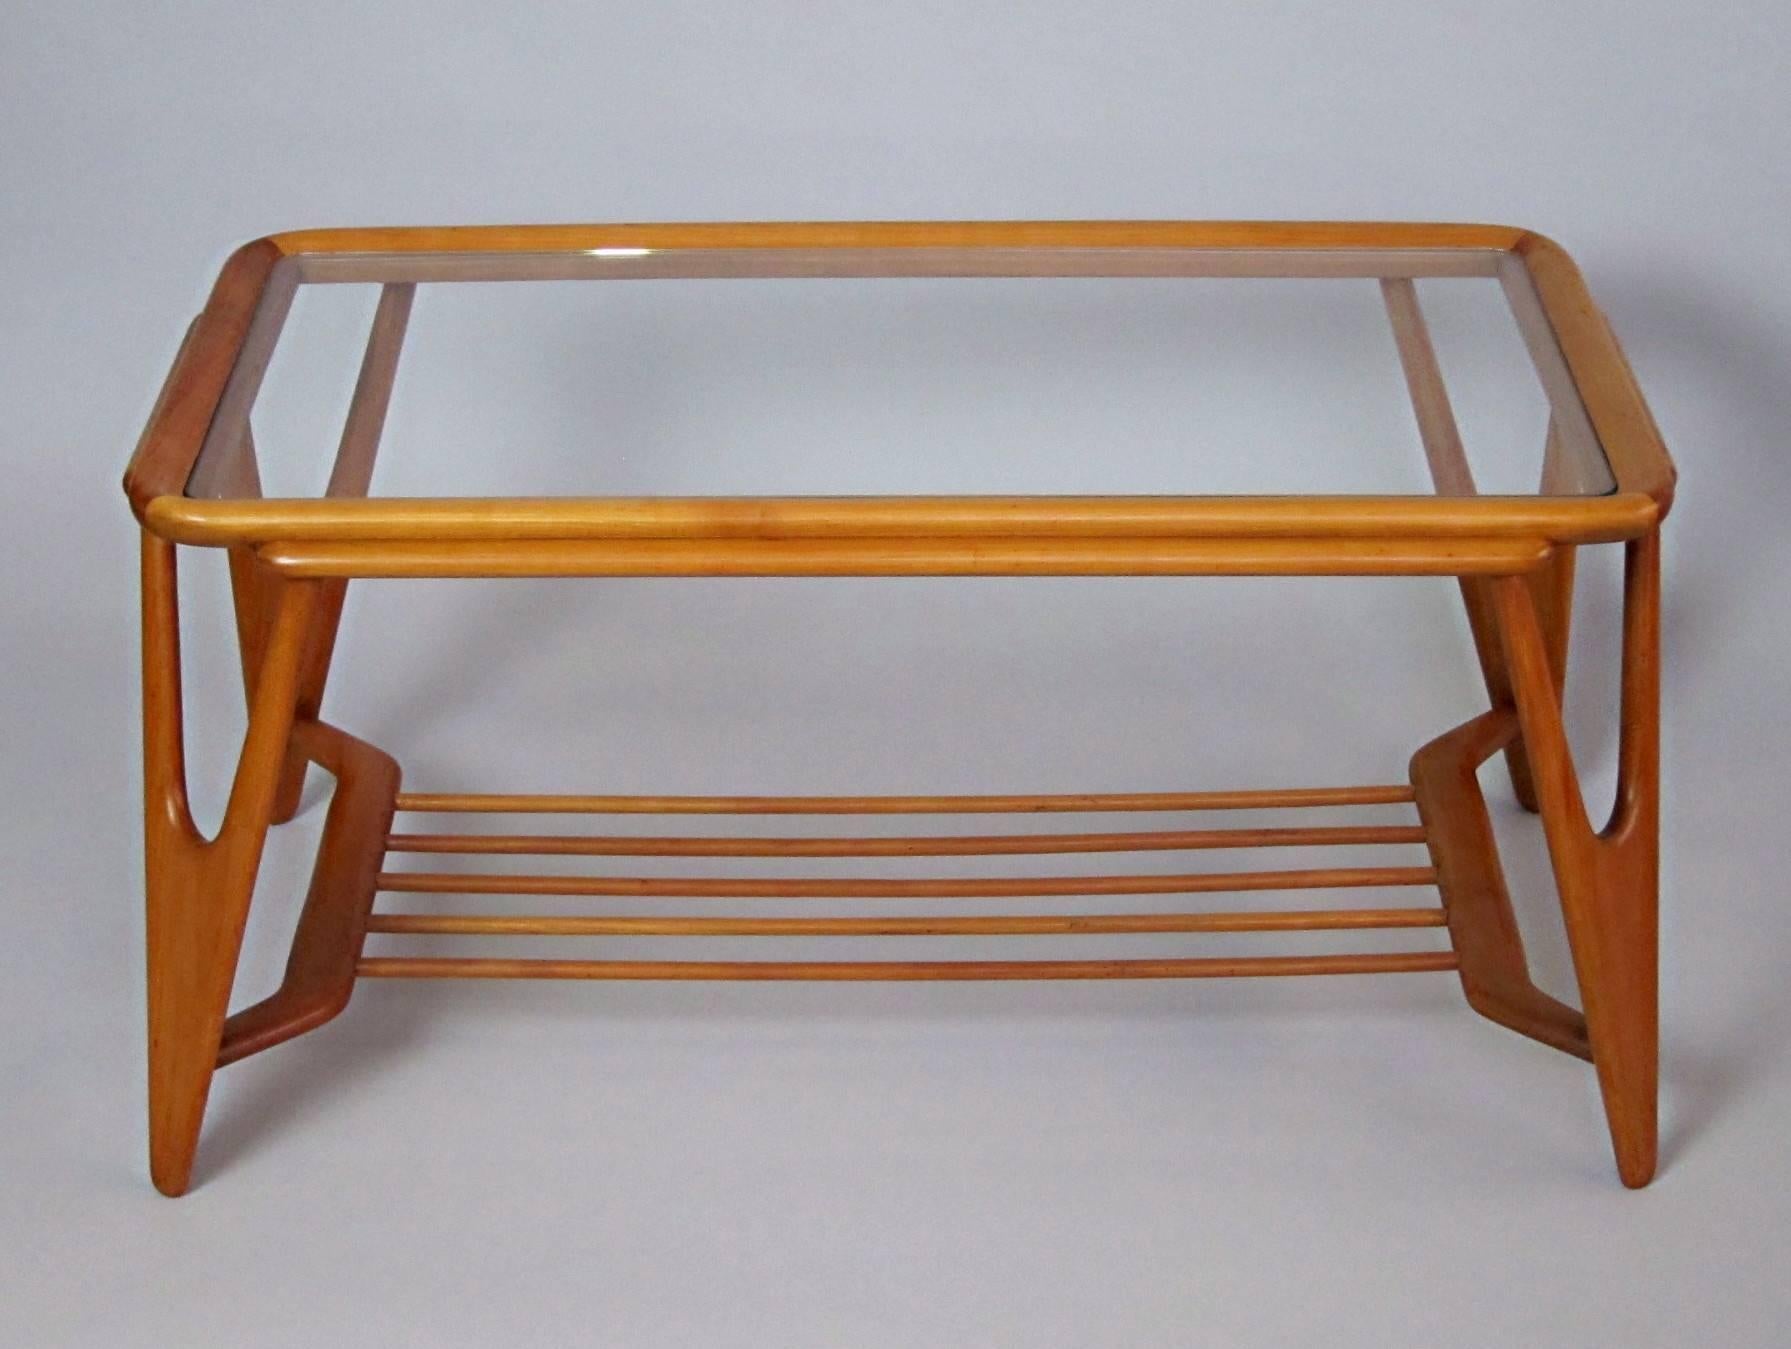 Beautiful crafted wooden Coffeetable in the Style of Cesare Lacca and Carlo Mollino, manufactured in the 1950s, new Glass Top with rounded Edges.